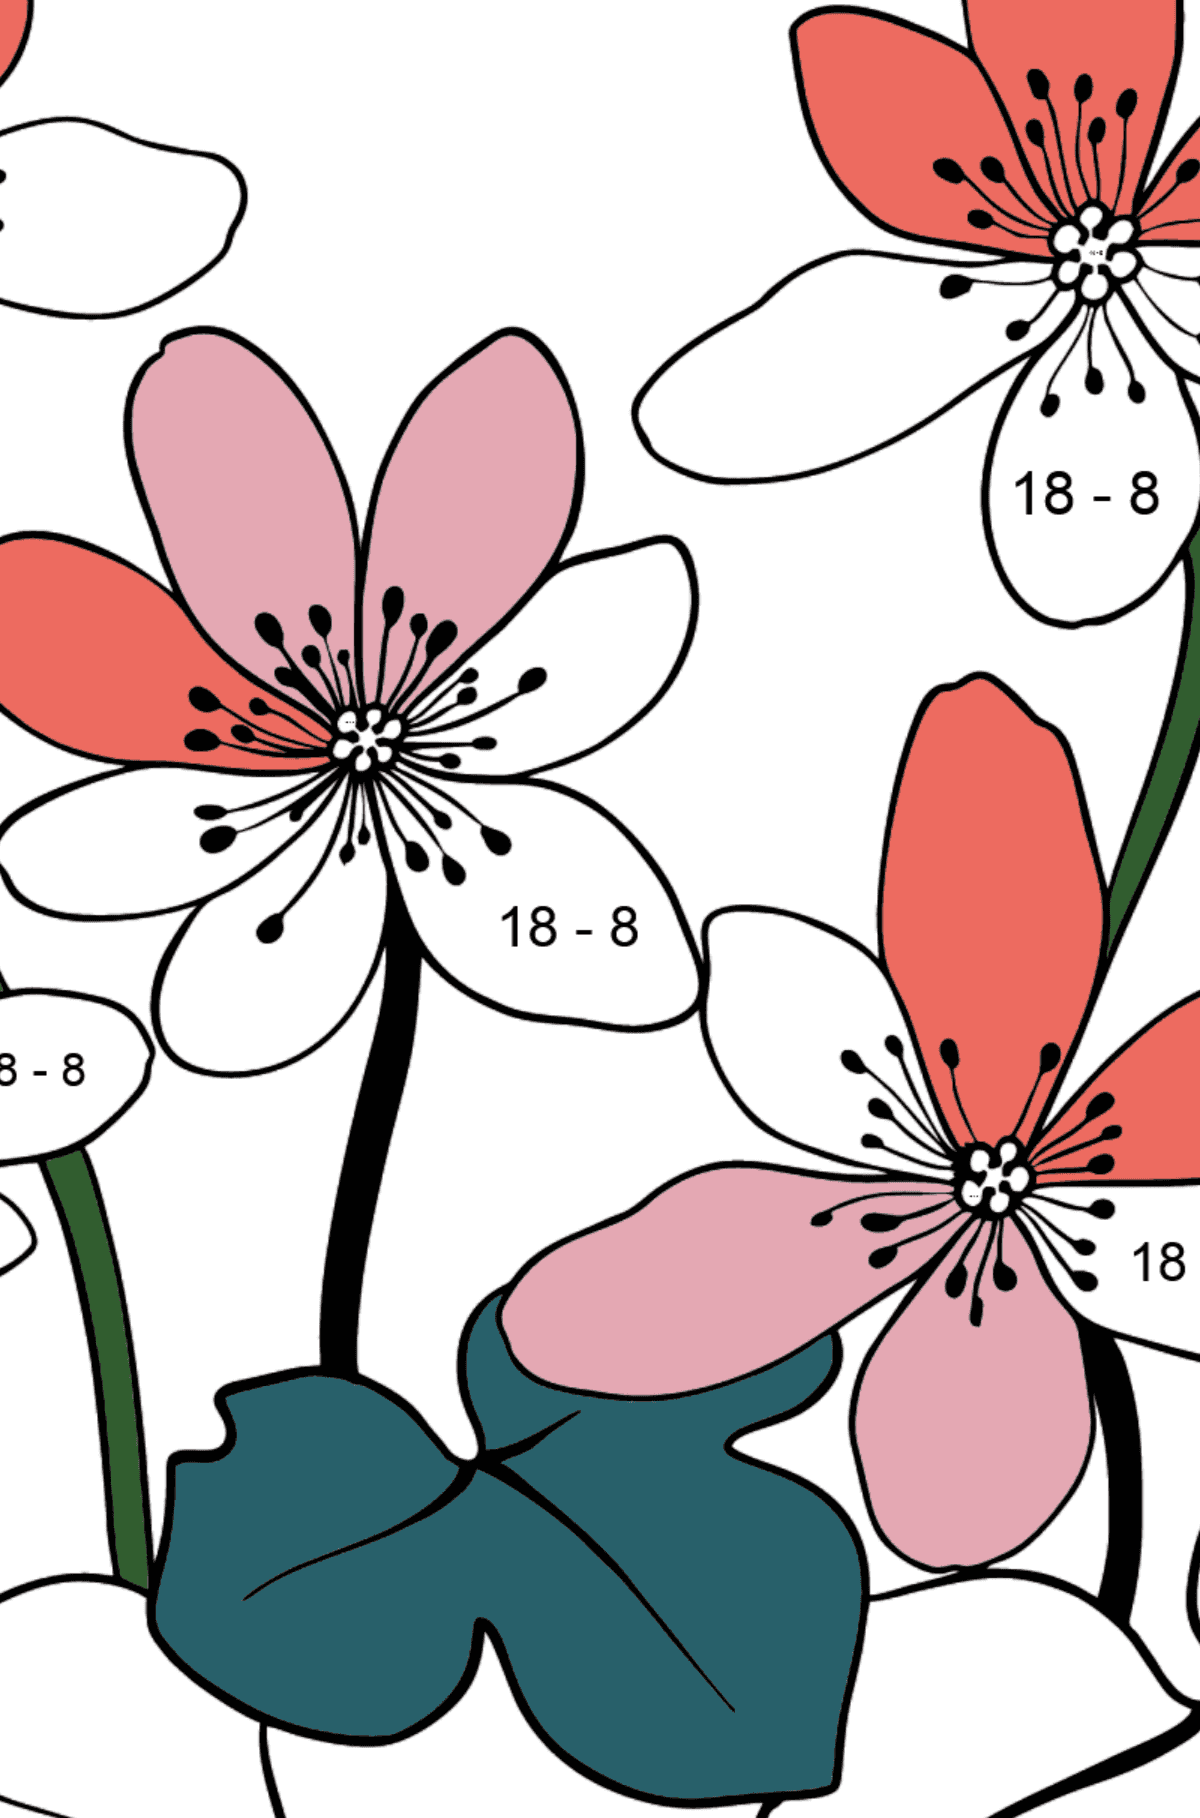 Flower Coloring Page - Hepatica - Math Coloring - Subtraction for Kids